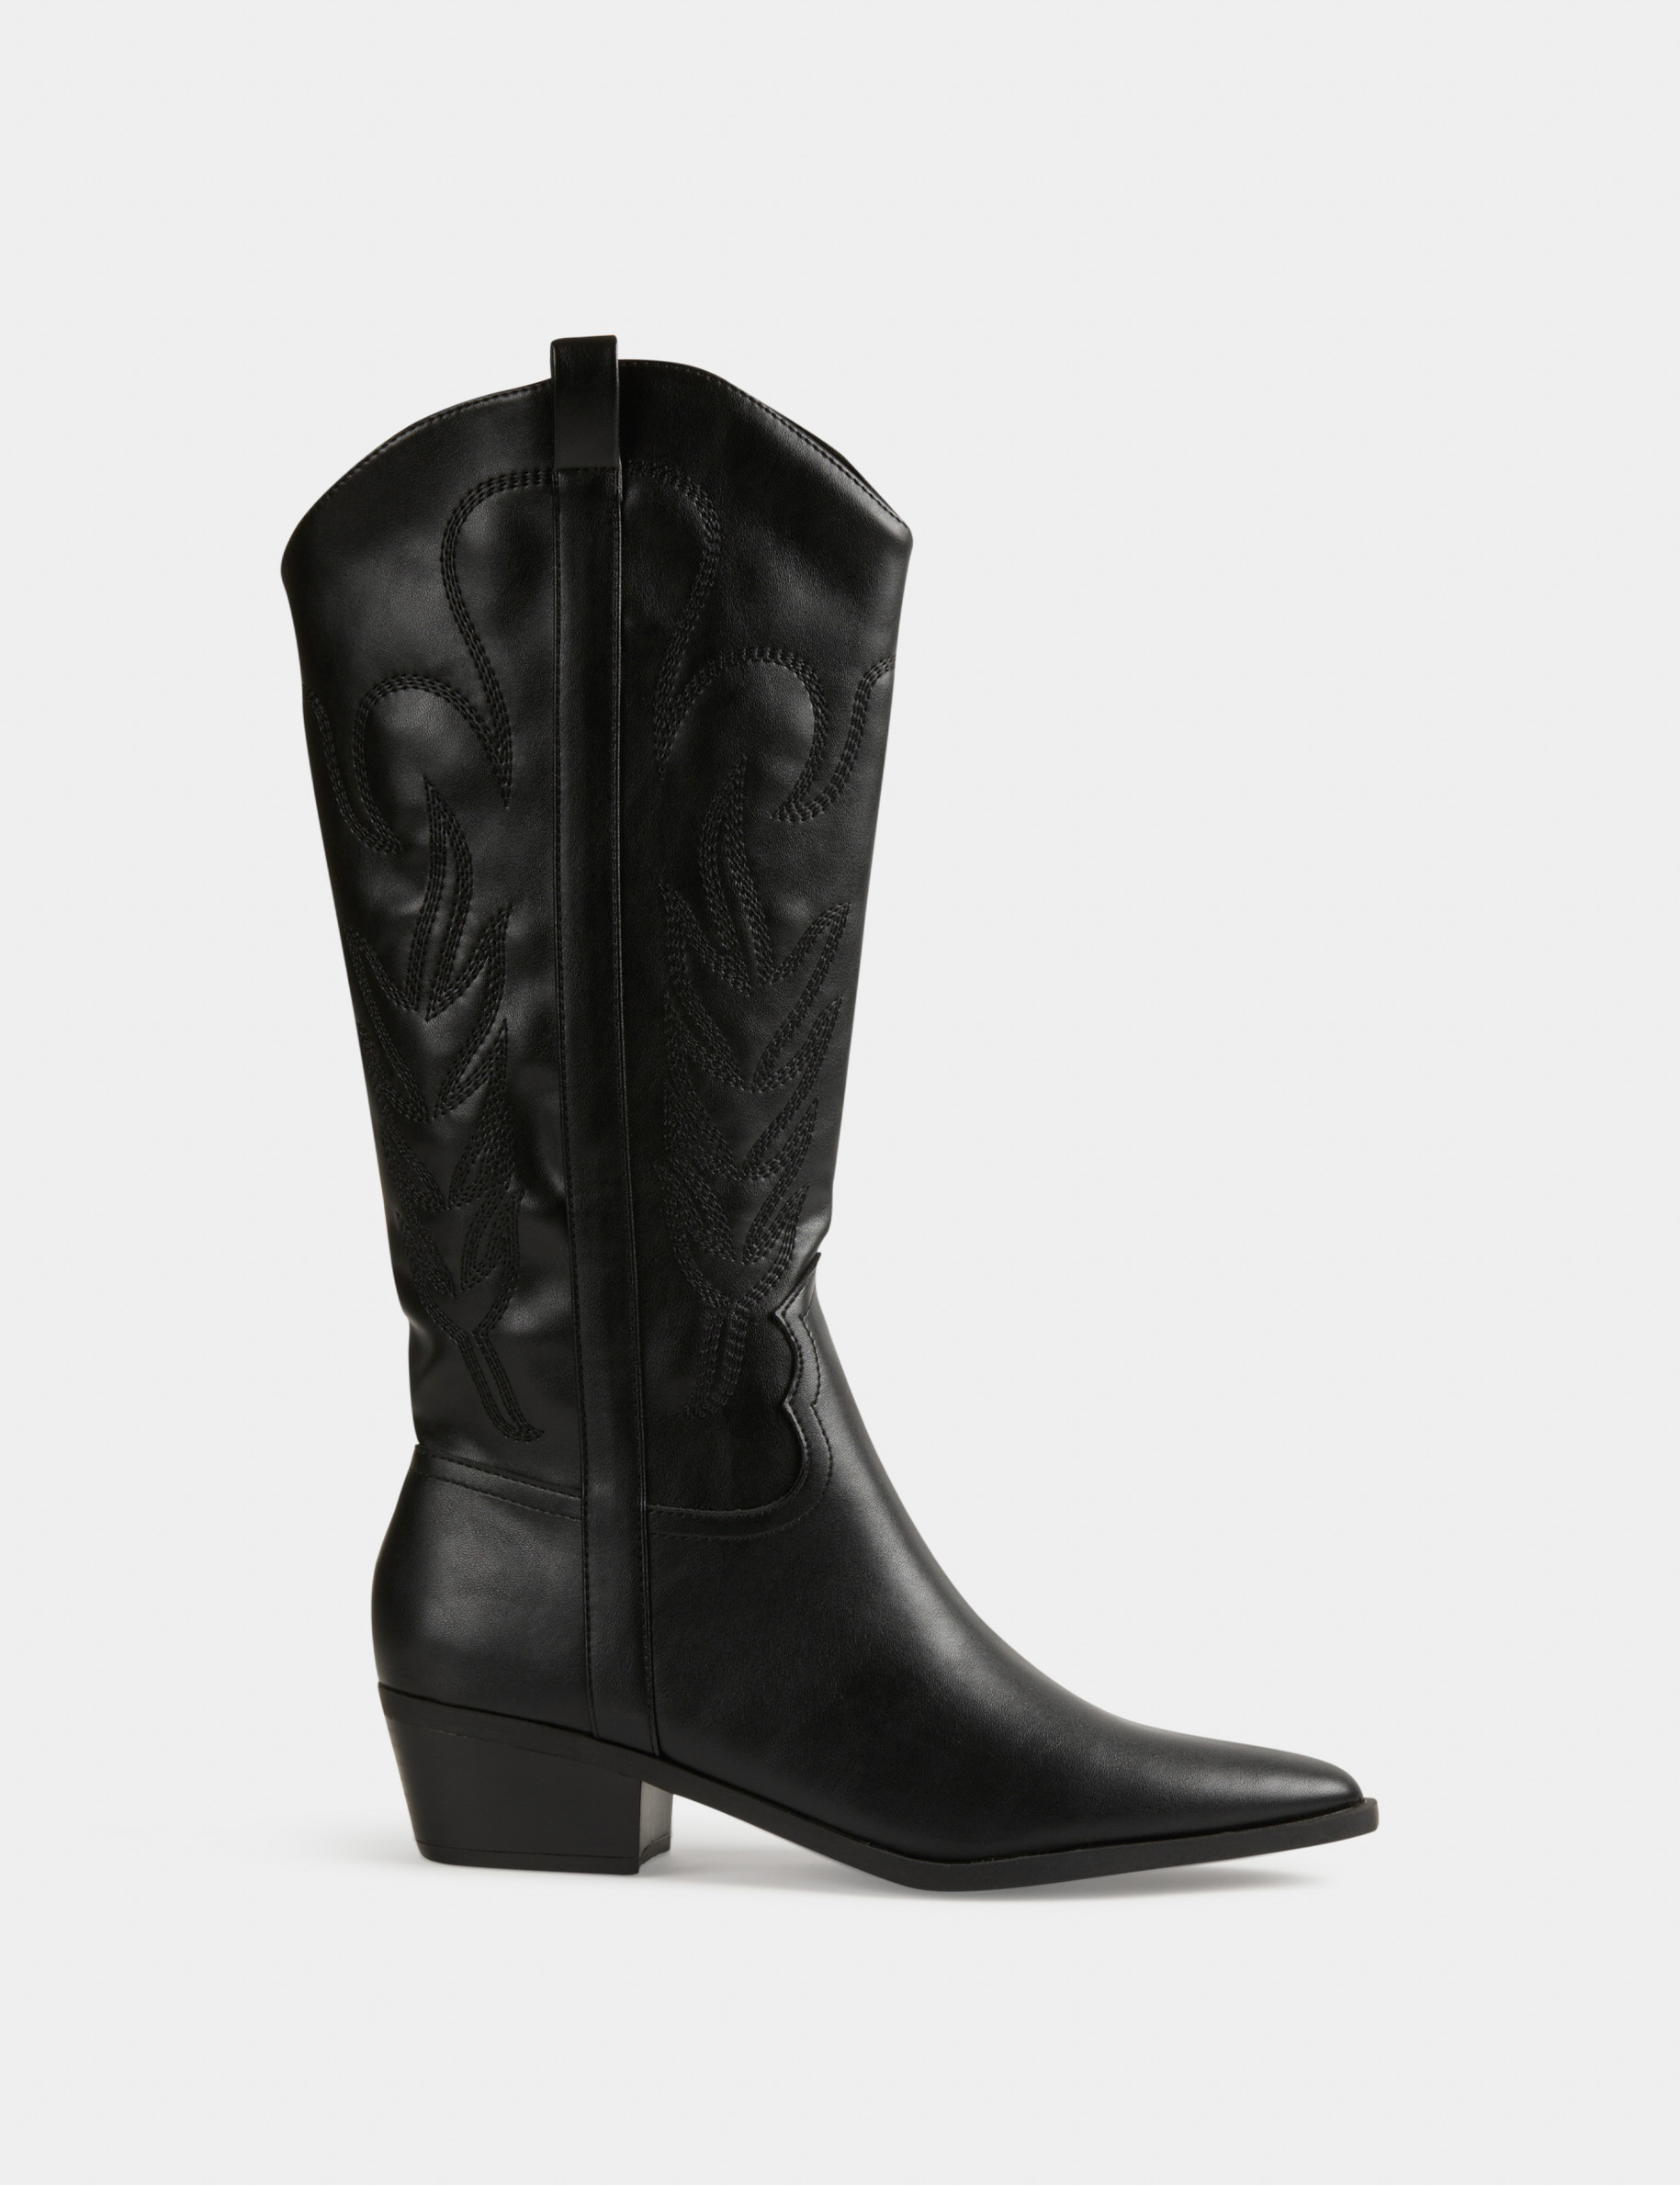 Zipped western style boots black ladies'